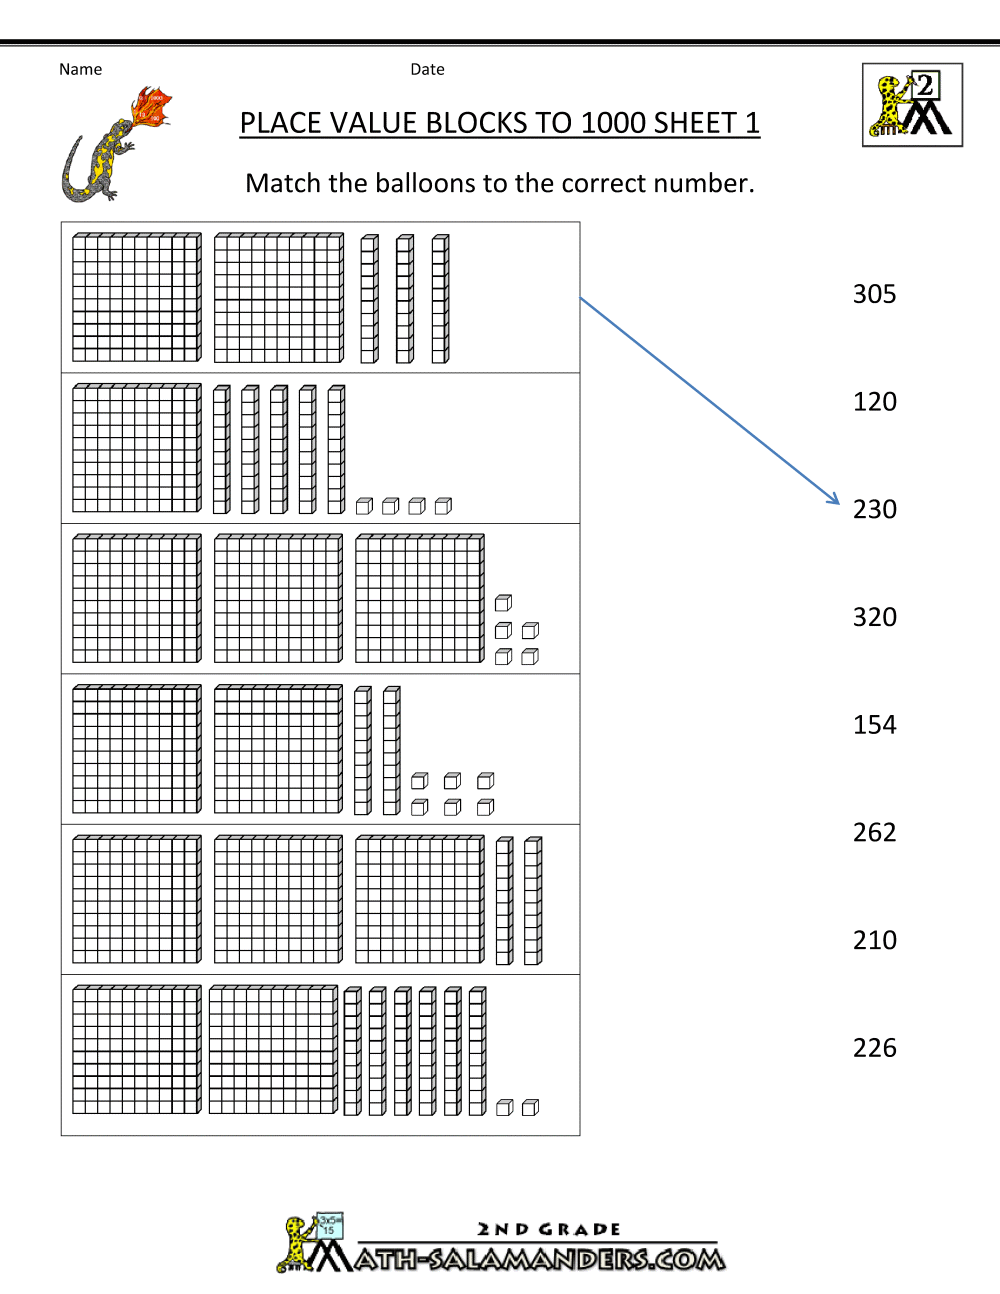 Place Value Blocks with 3 digit number